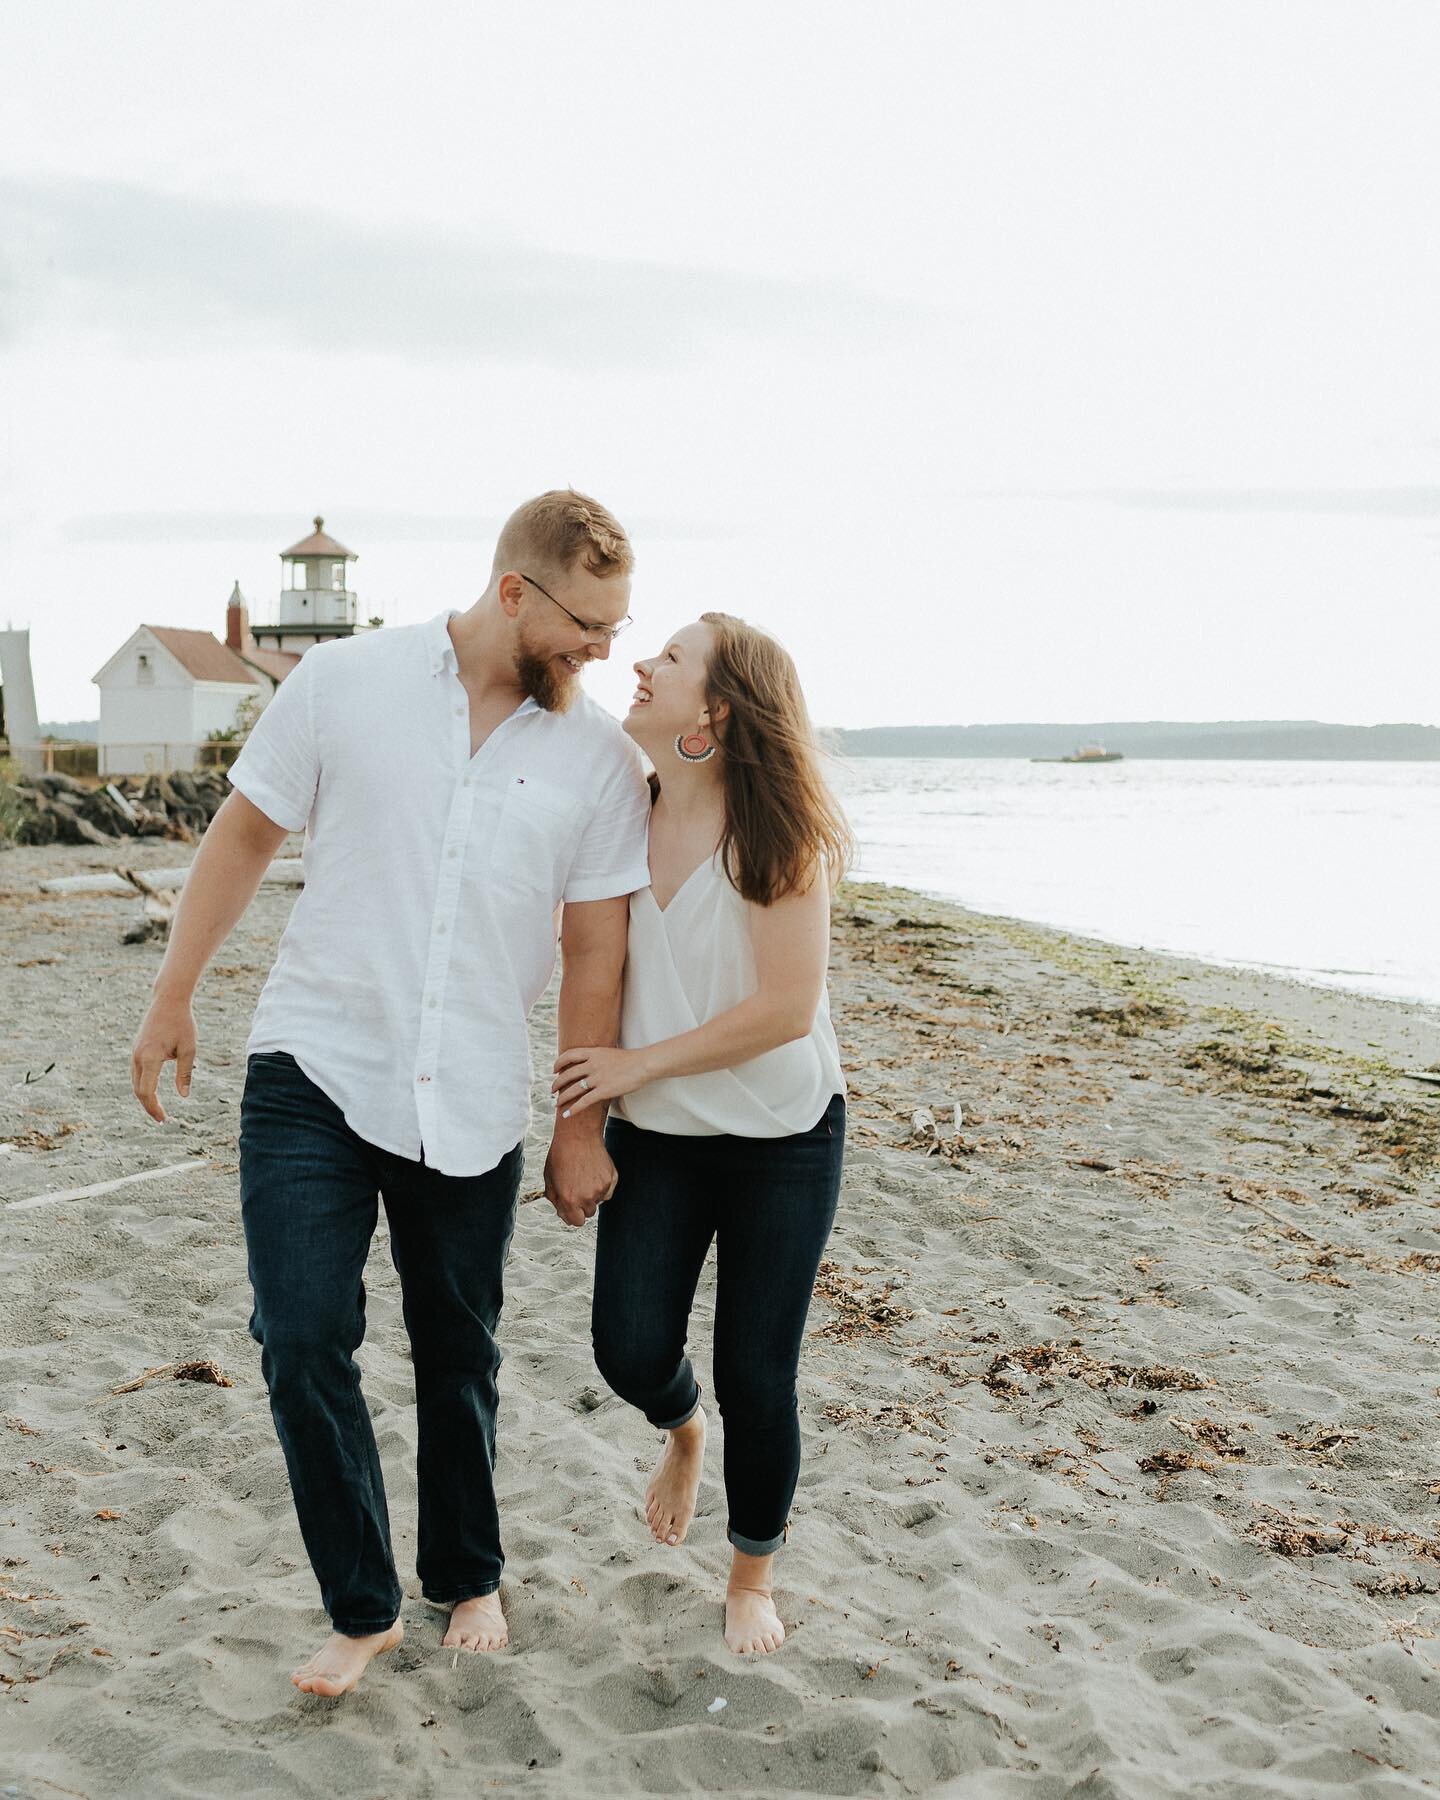 I have so many sessions that I need to share. So here&rsquo;s an engagement session from this summer where we ran around the beach, drank some Rainier&rsquo;s, and laughed non stop! Can&rsquo;t wait for their wedding next year!